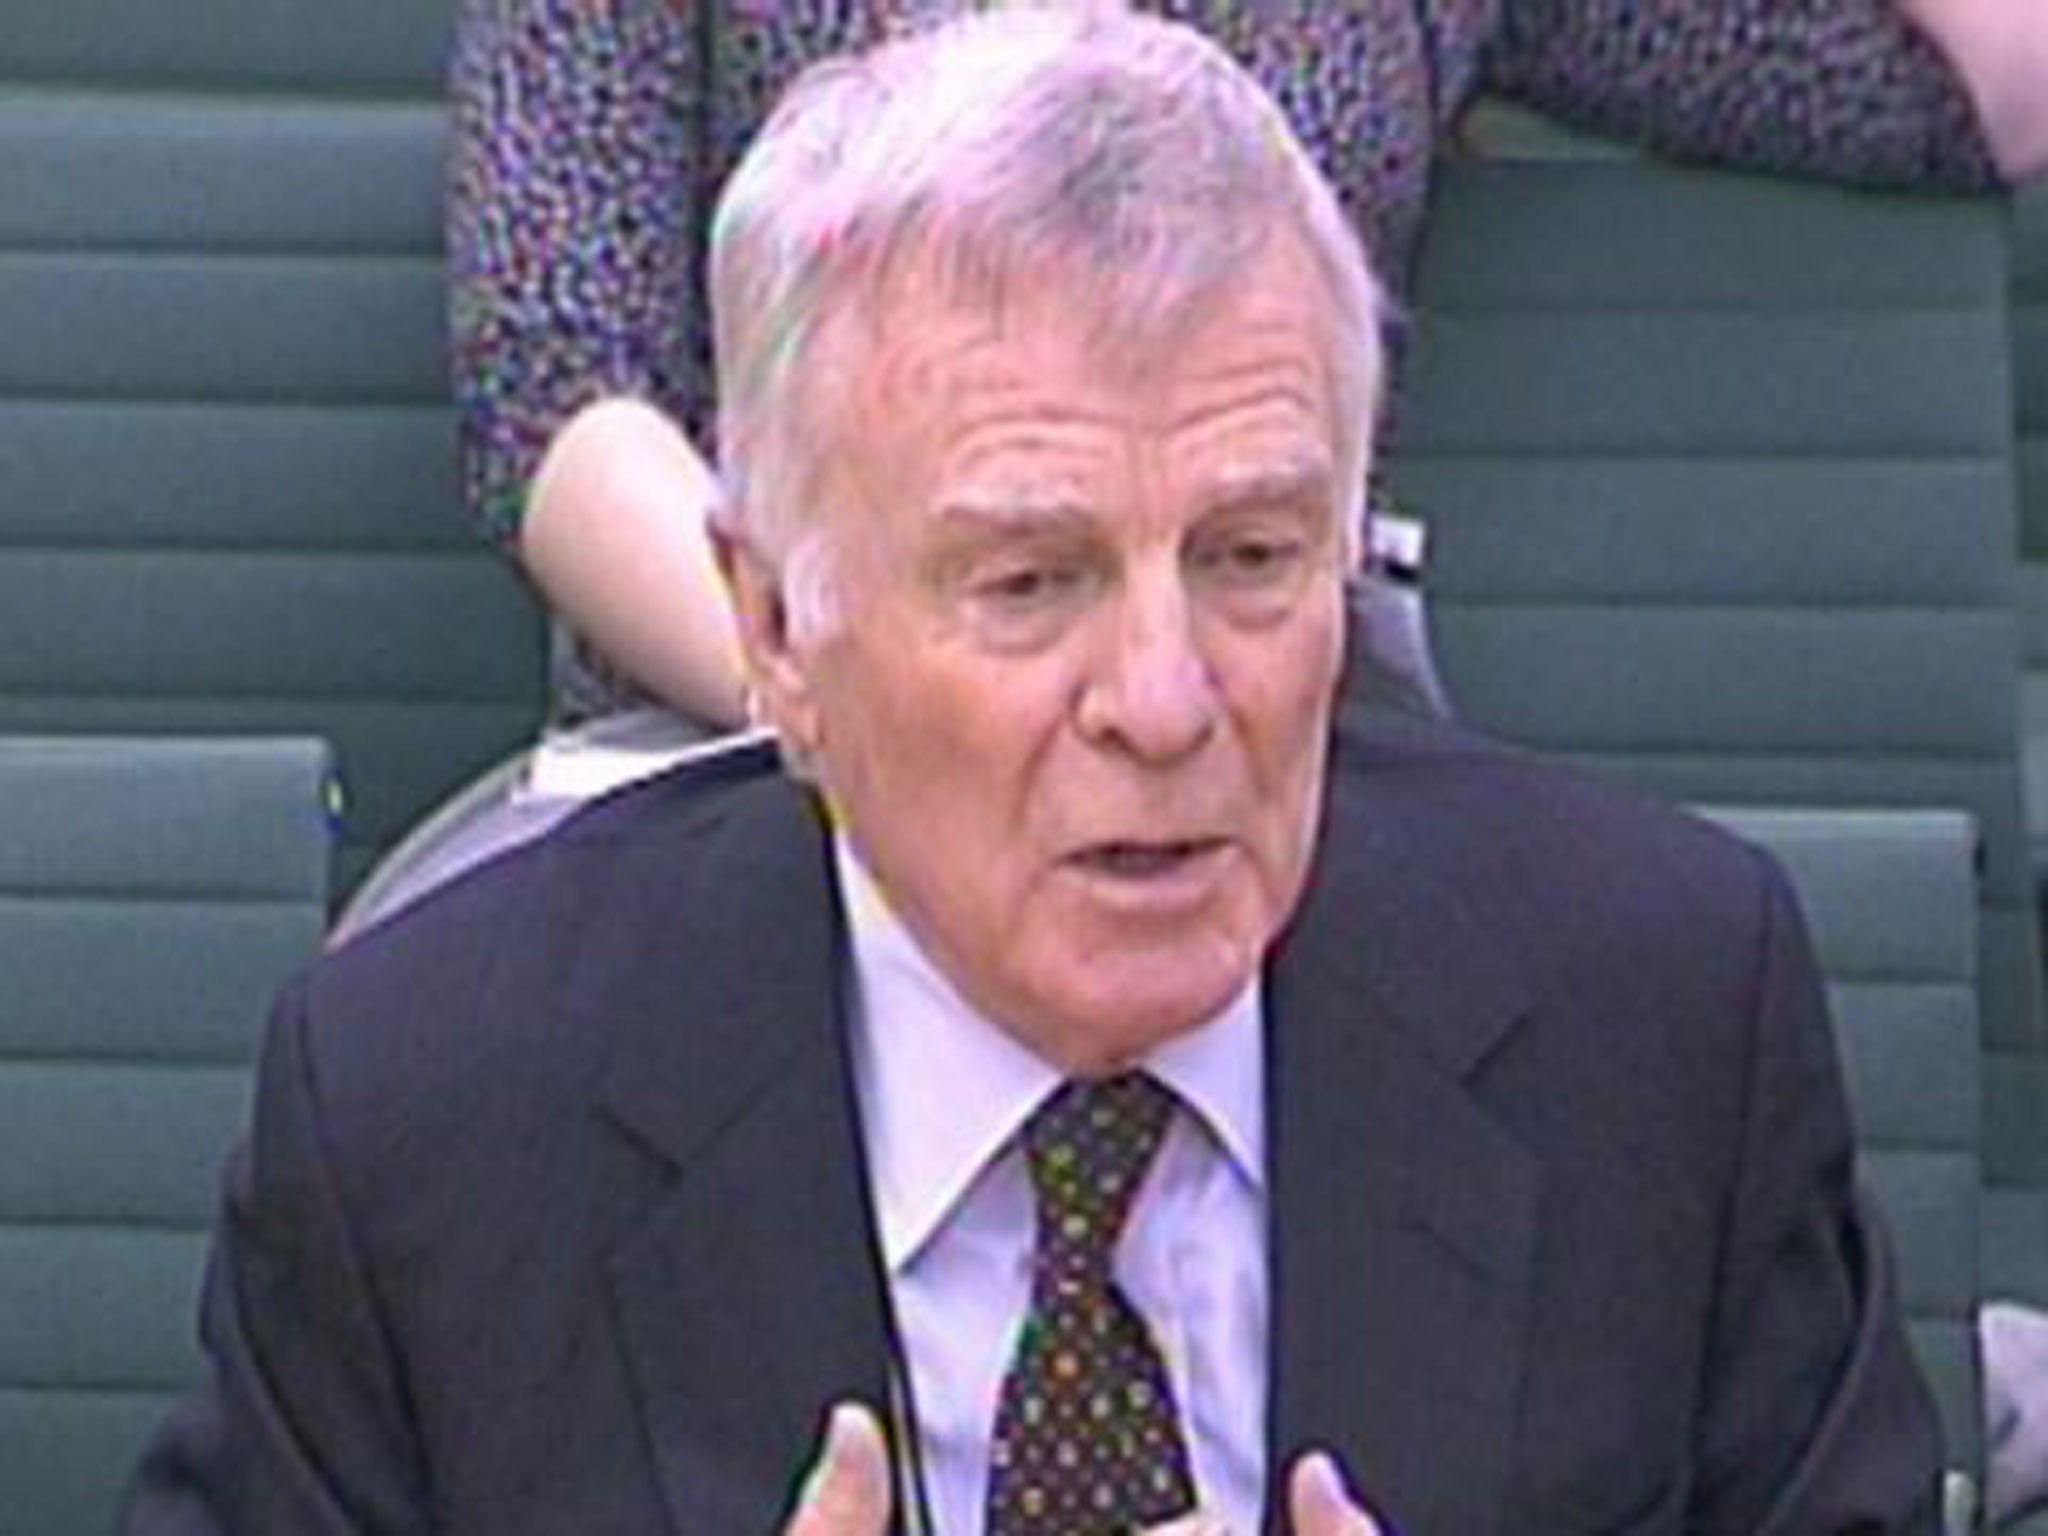 Max Mosley explained why he gave financial help to victims of hacking to sue papers`